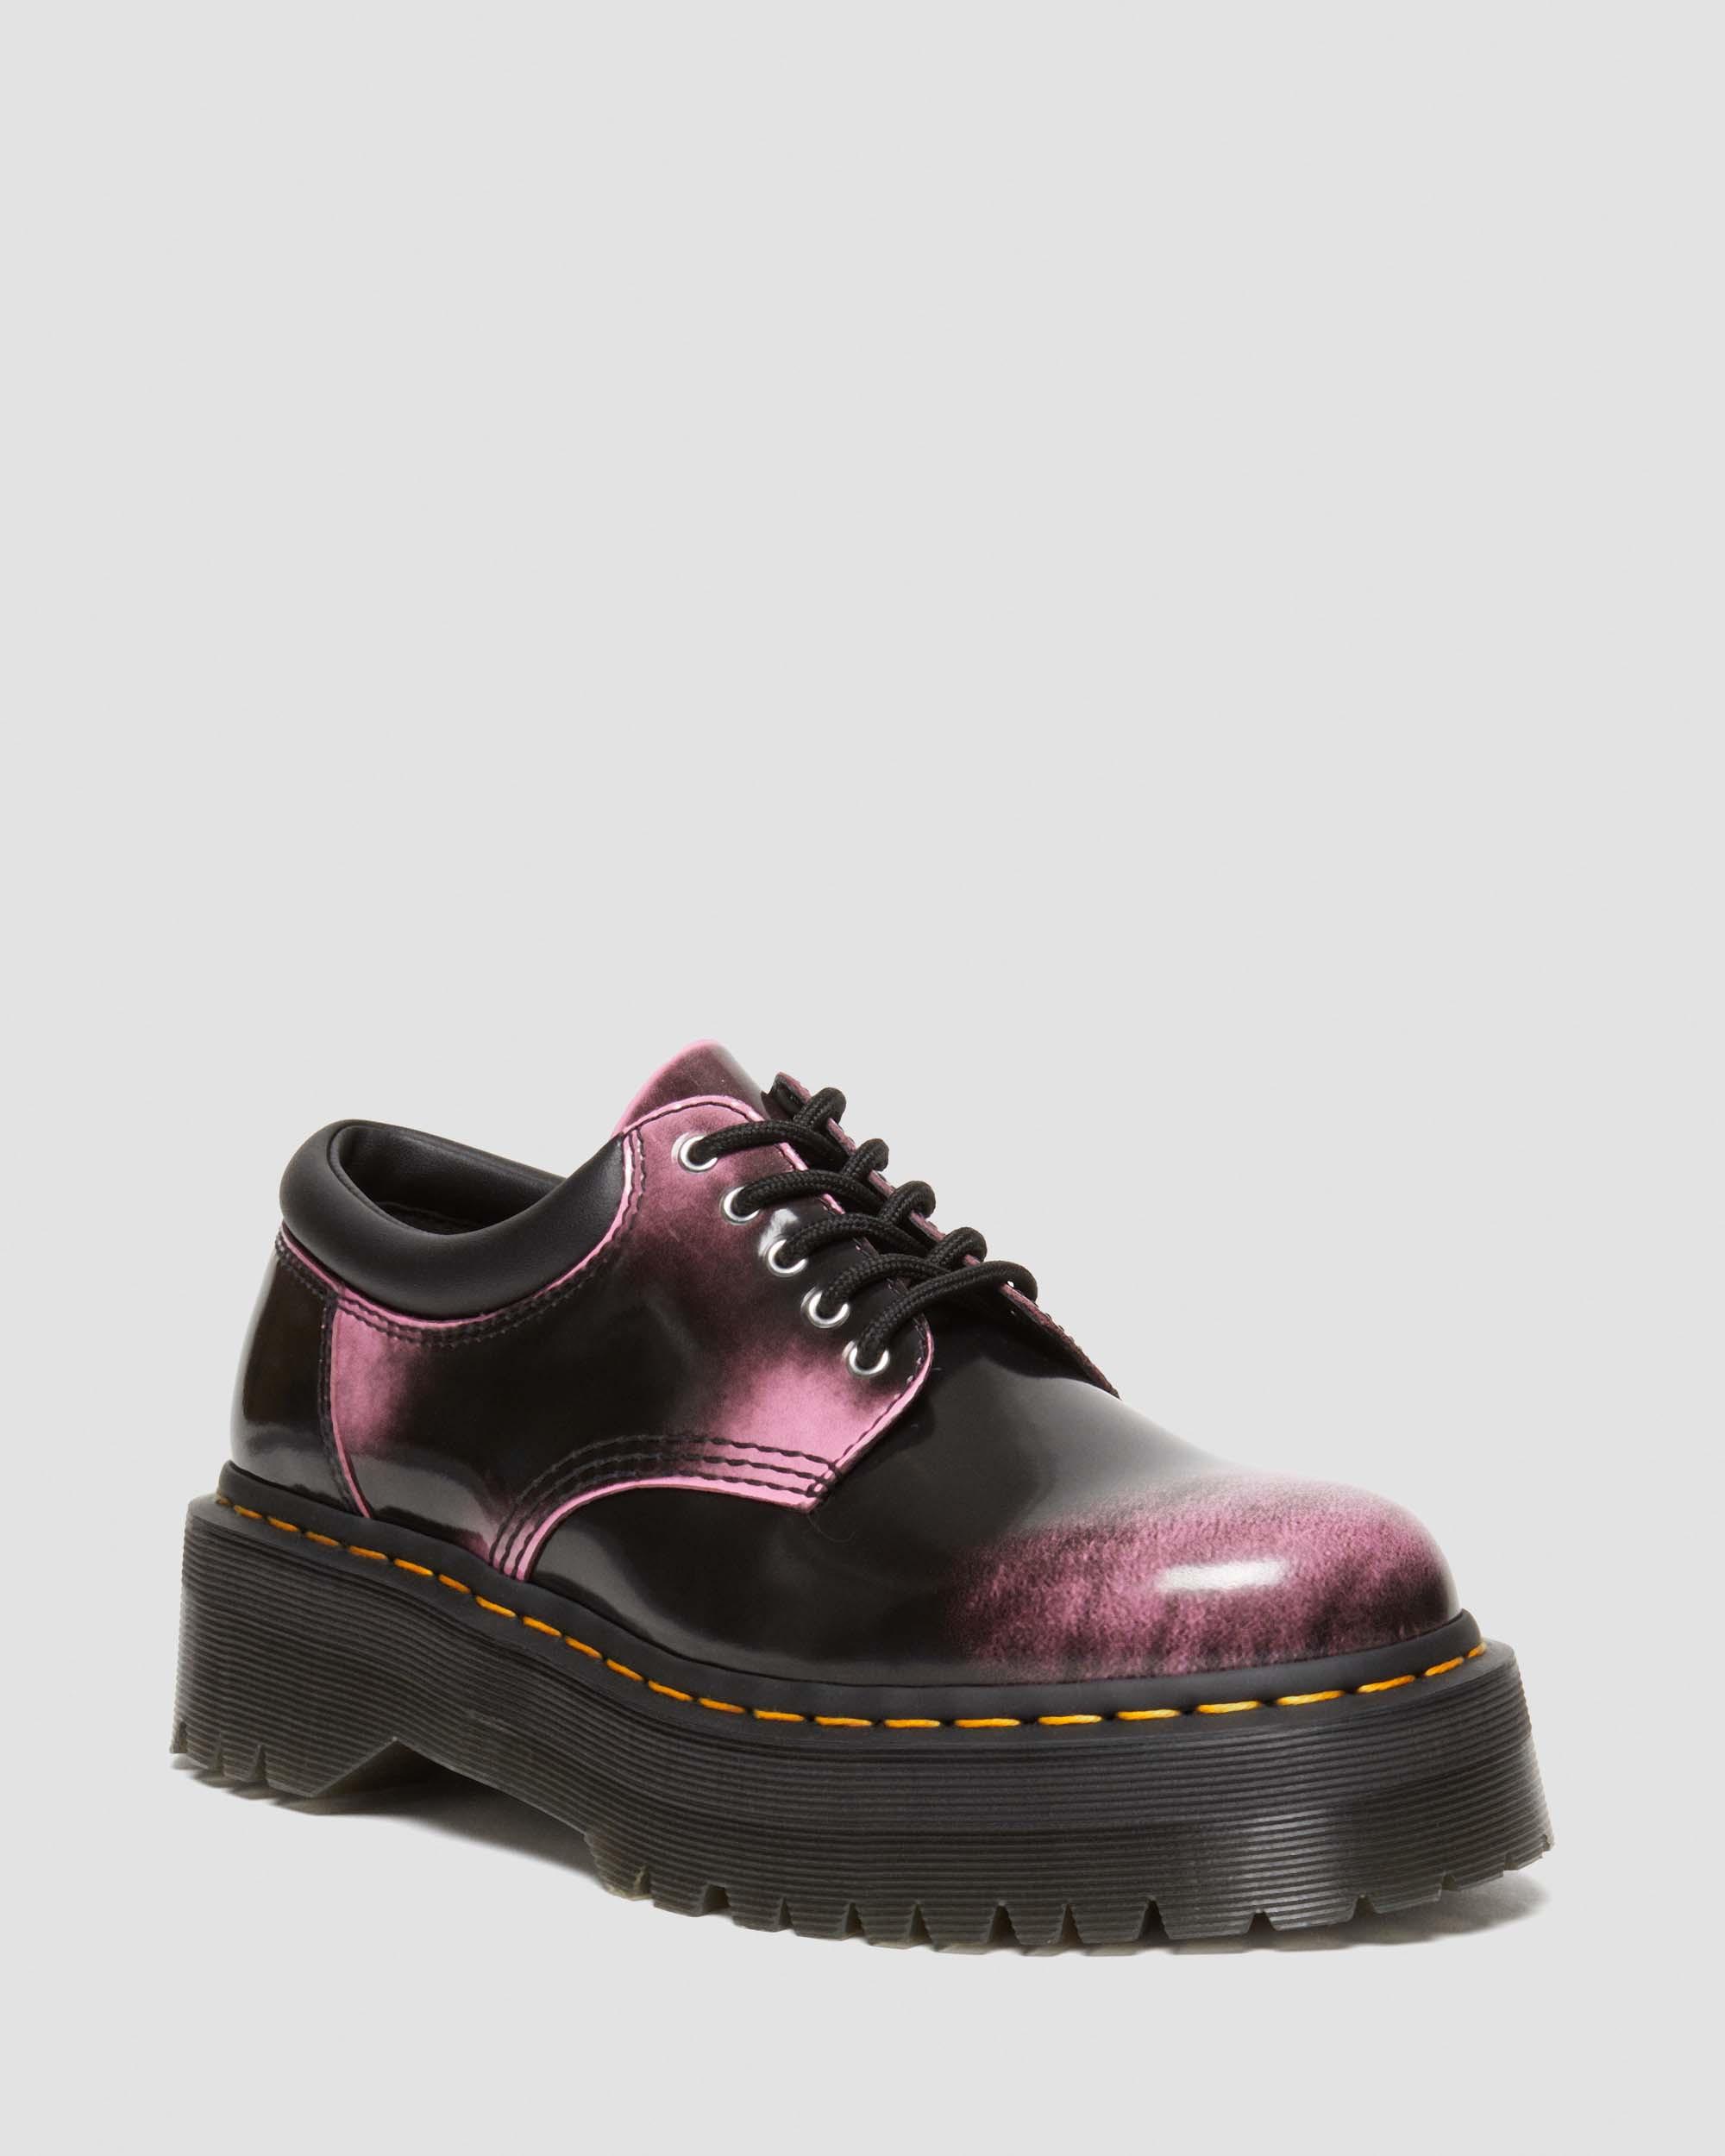 8053 Distressed Leather Platform Casual Shoes